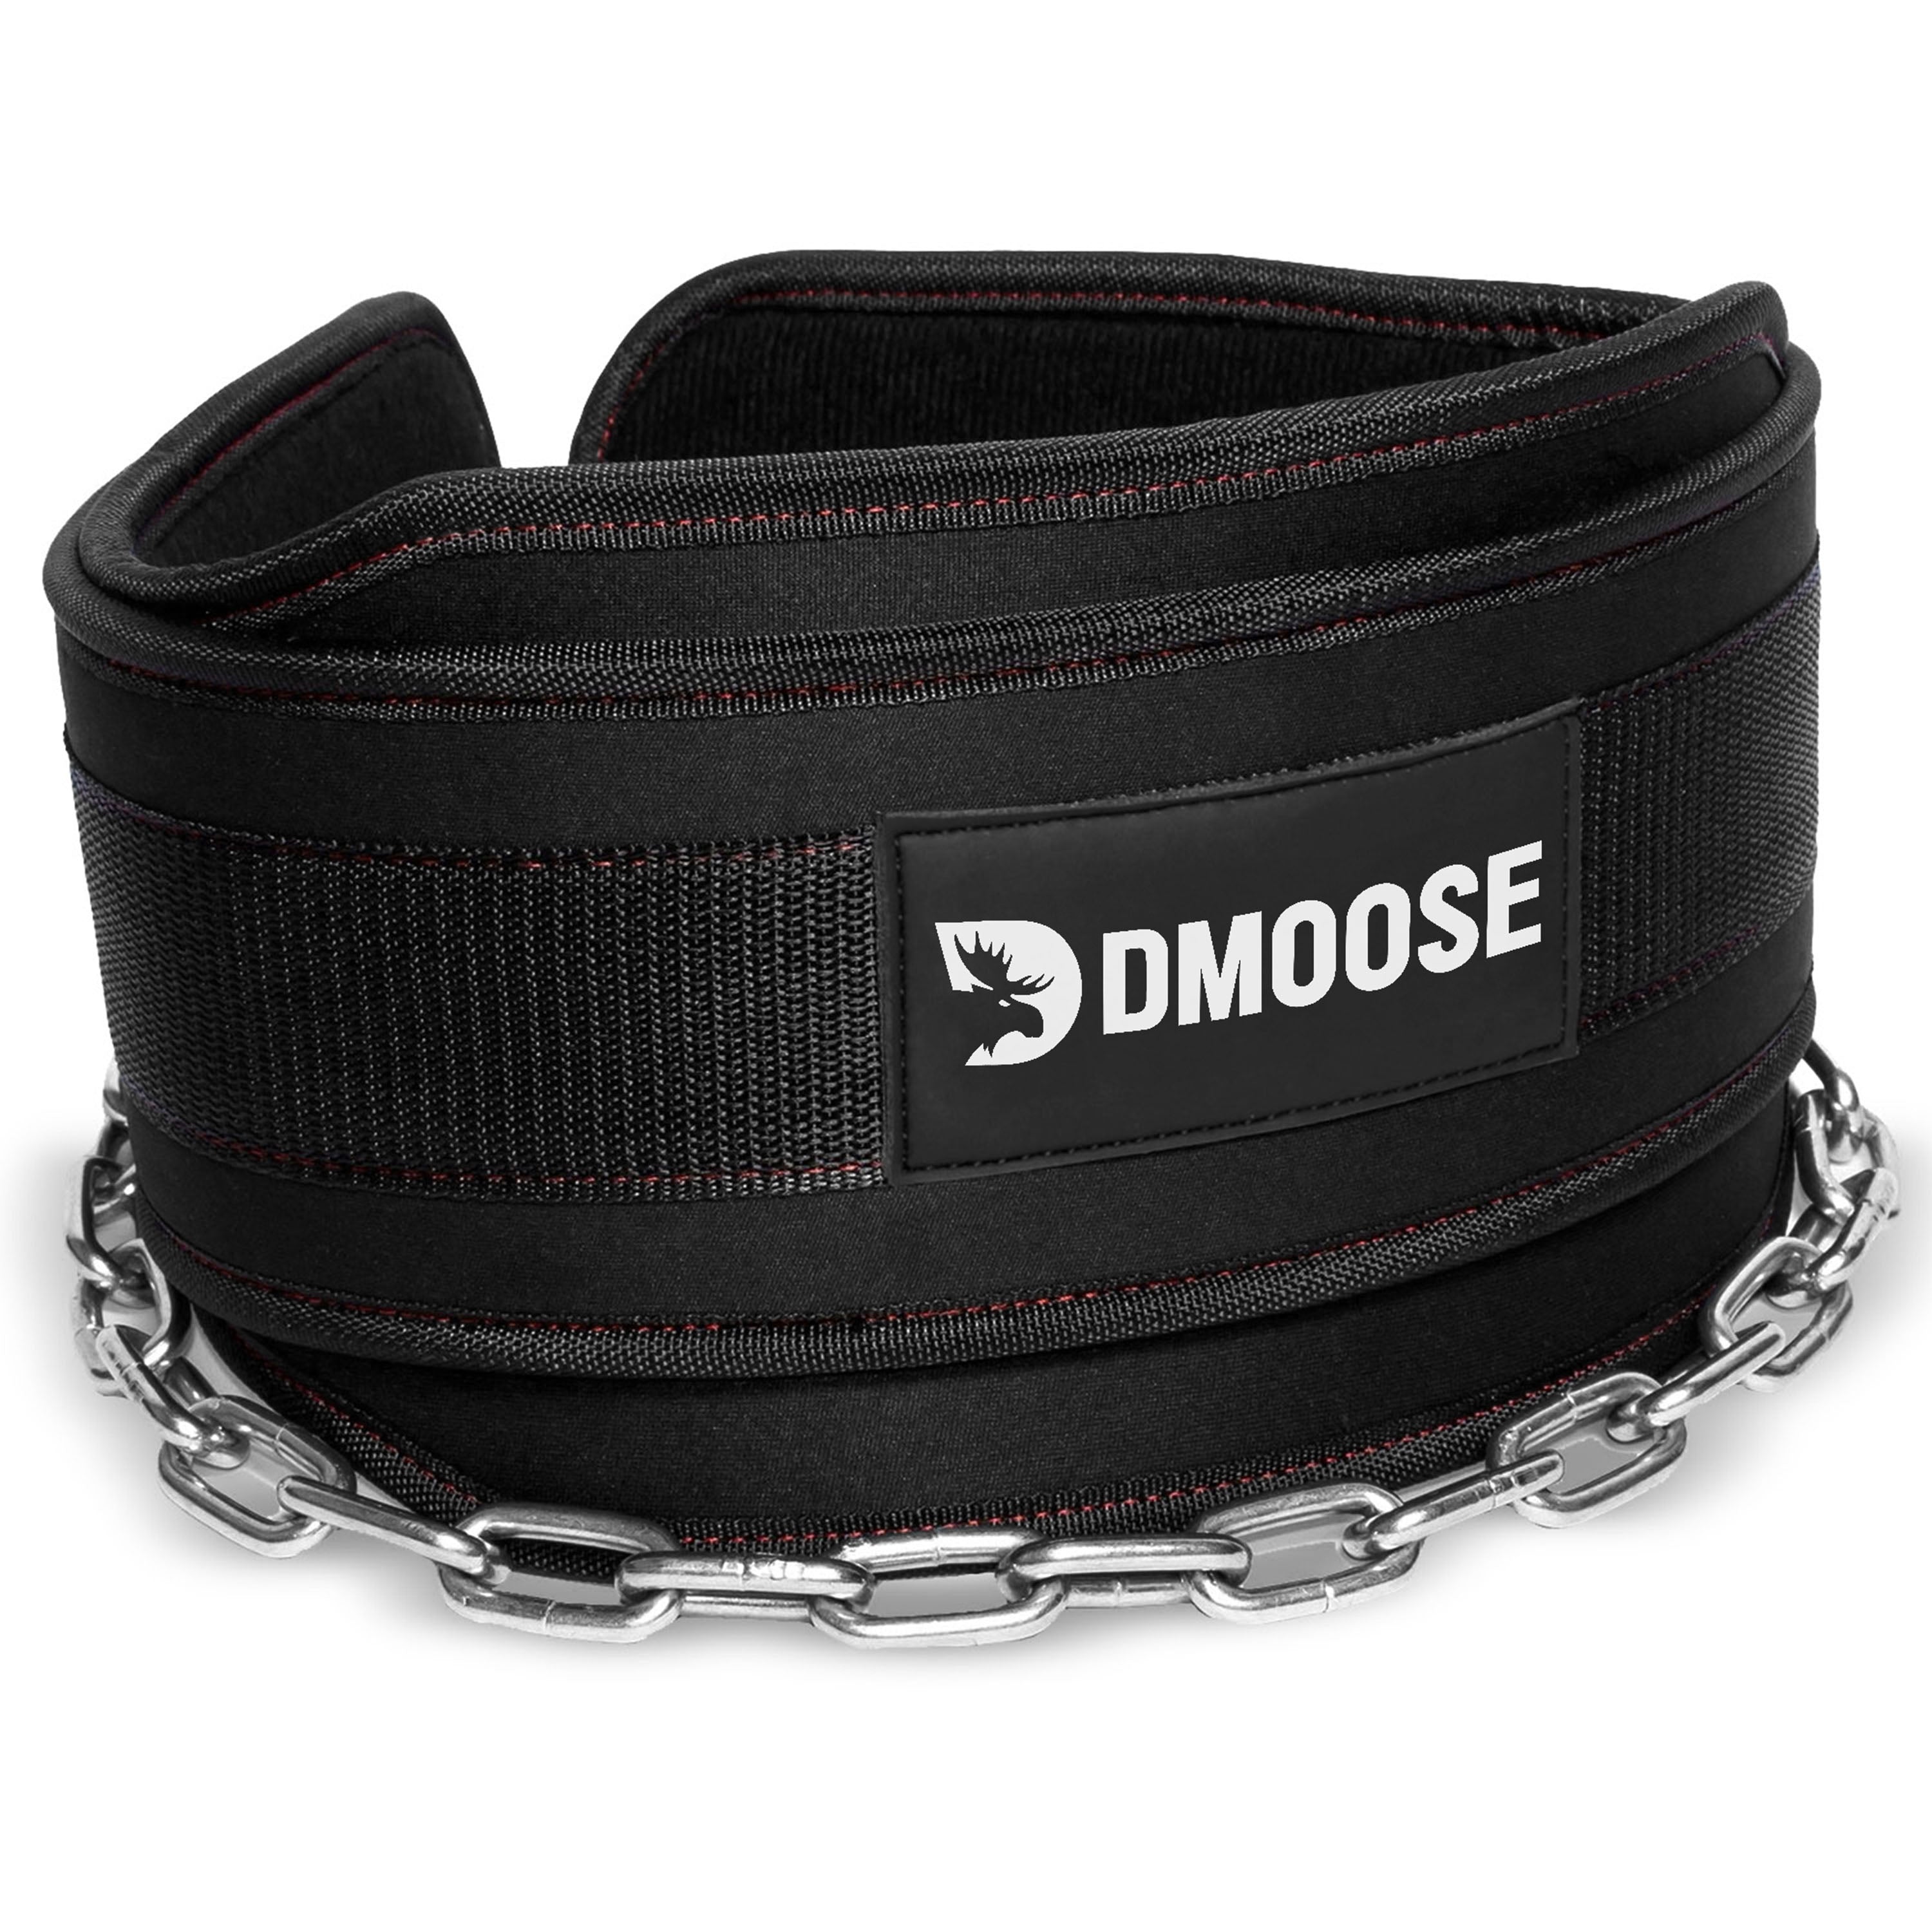 Dip Belt With Chain